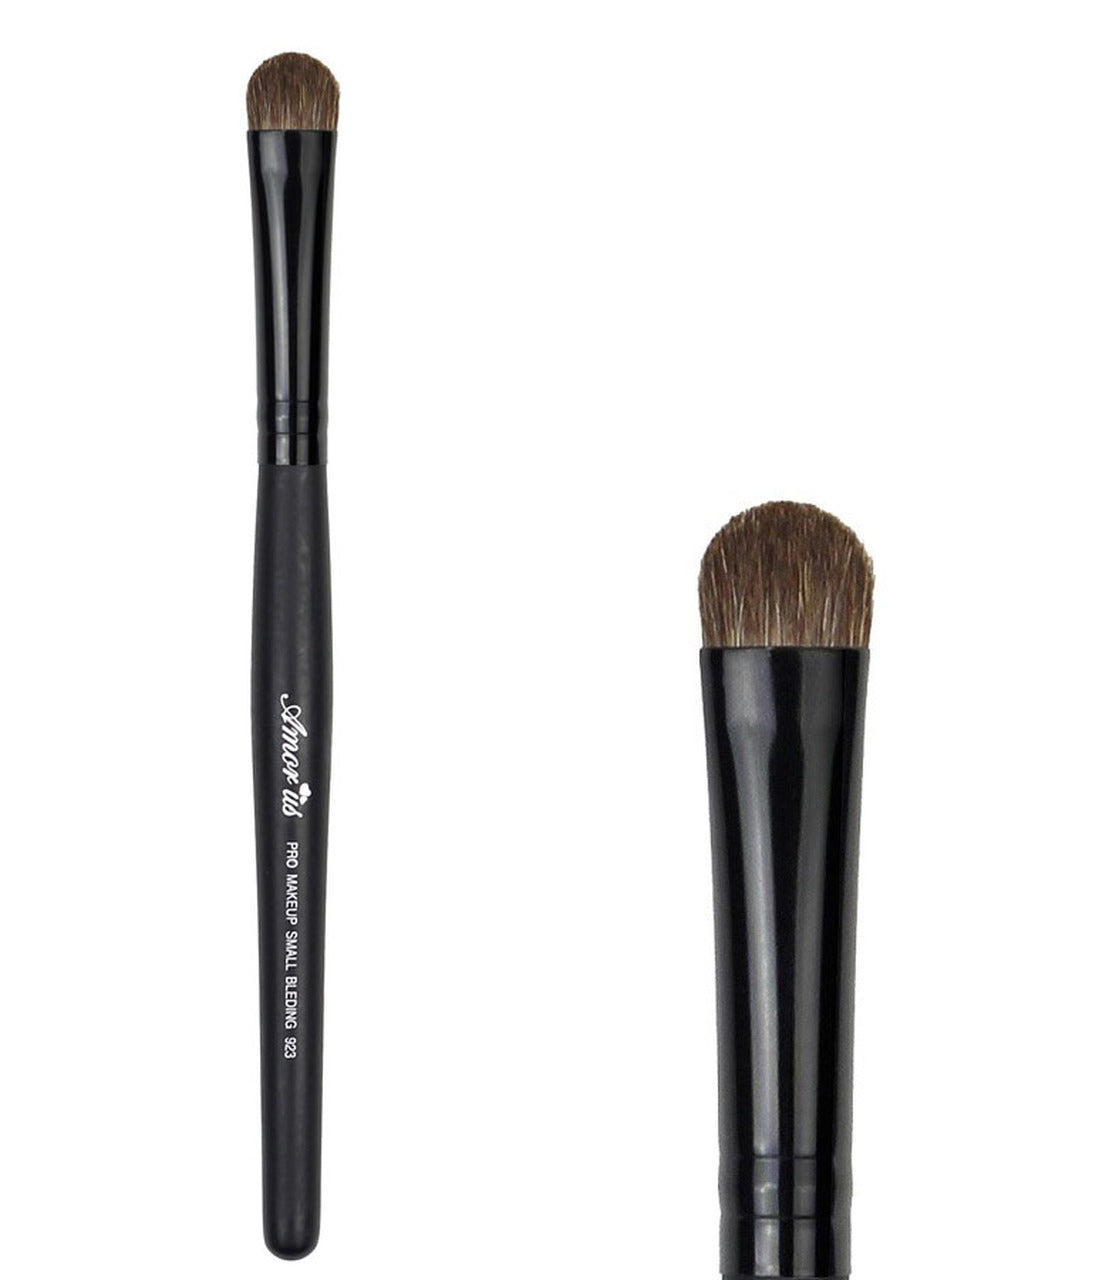 AM-BR923 : Professional Deluxe Large Shadow Brush 1 DZ